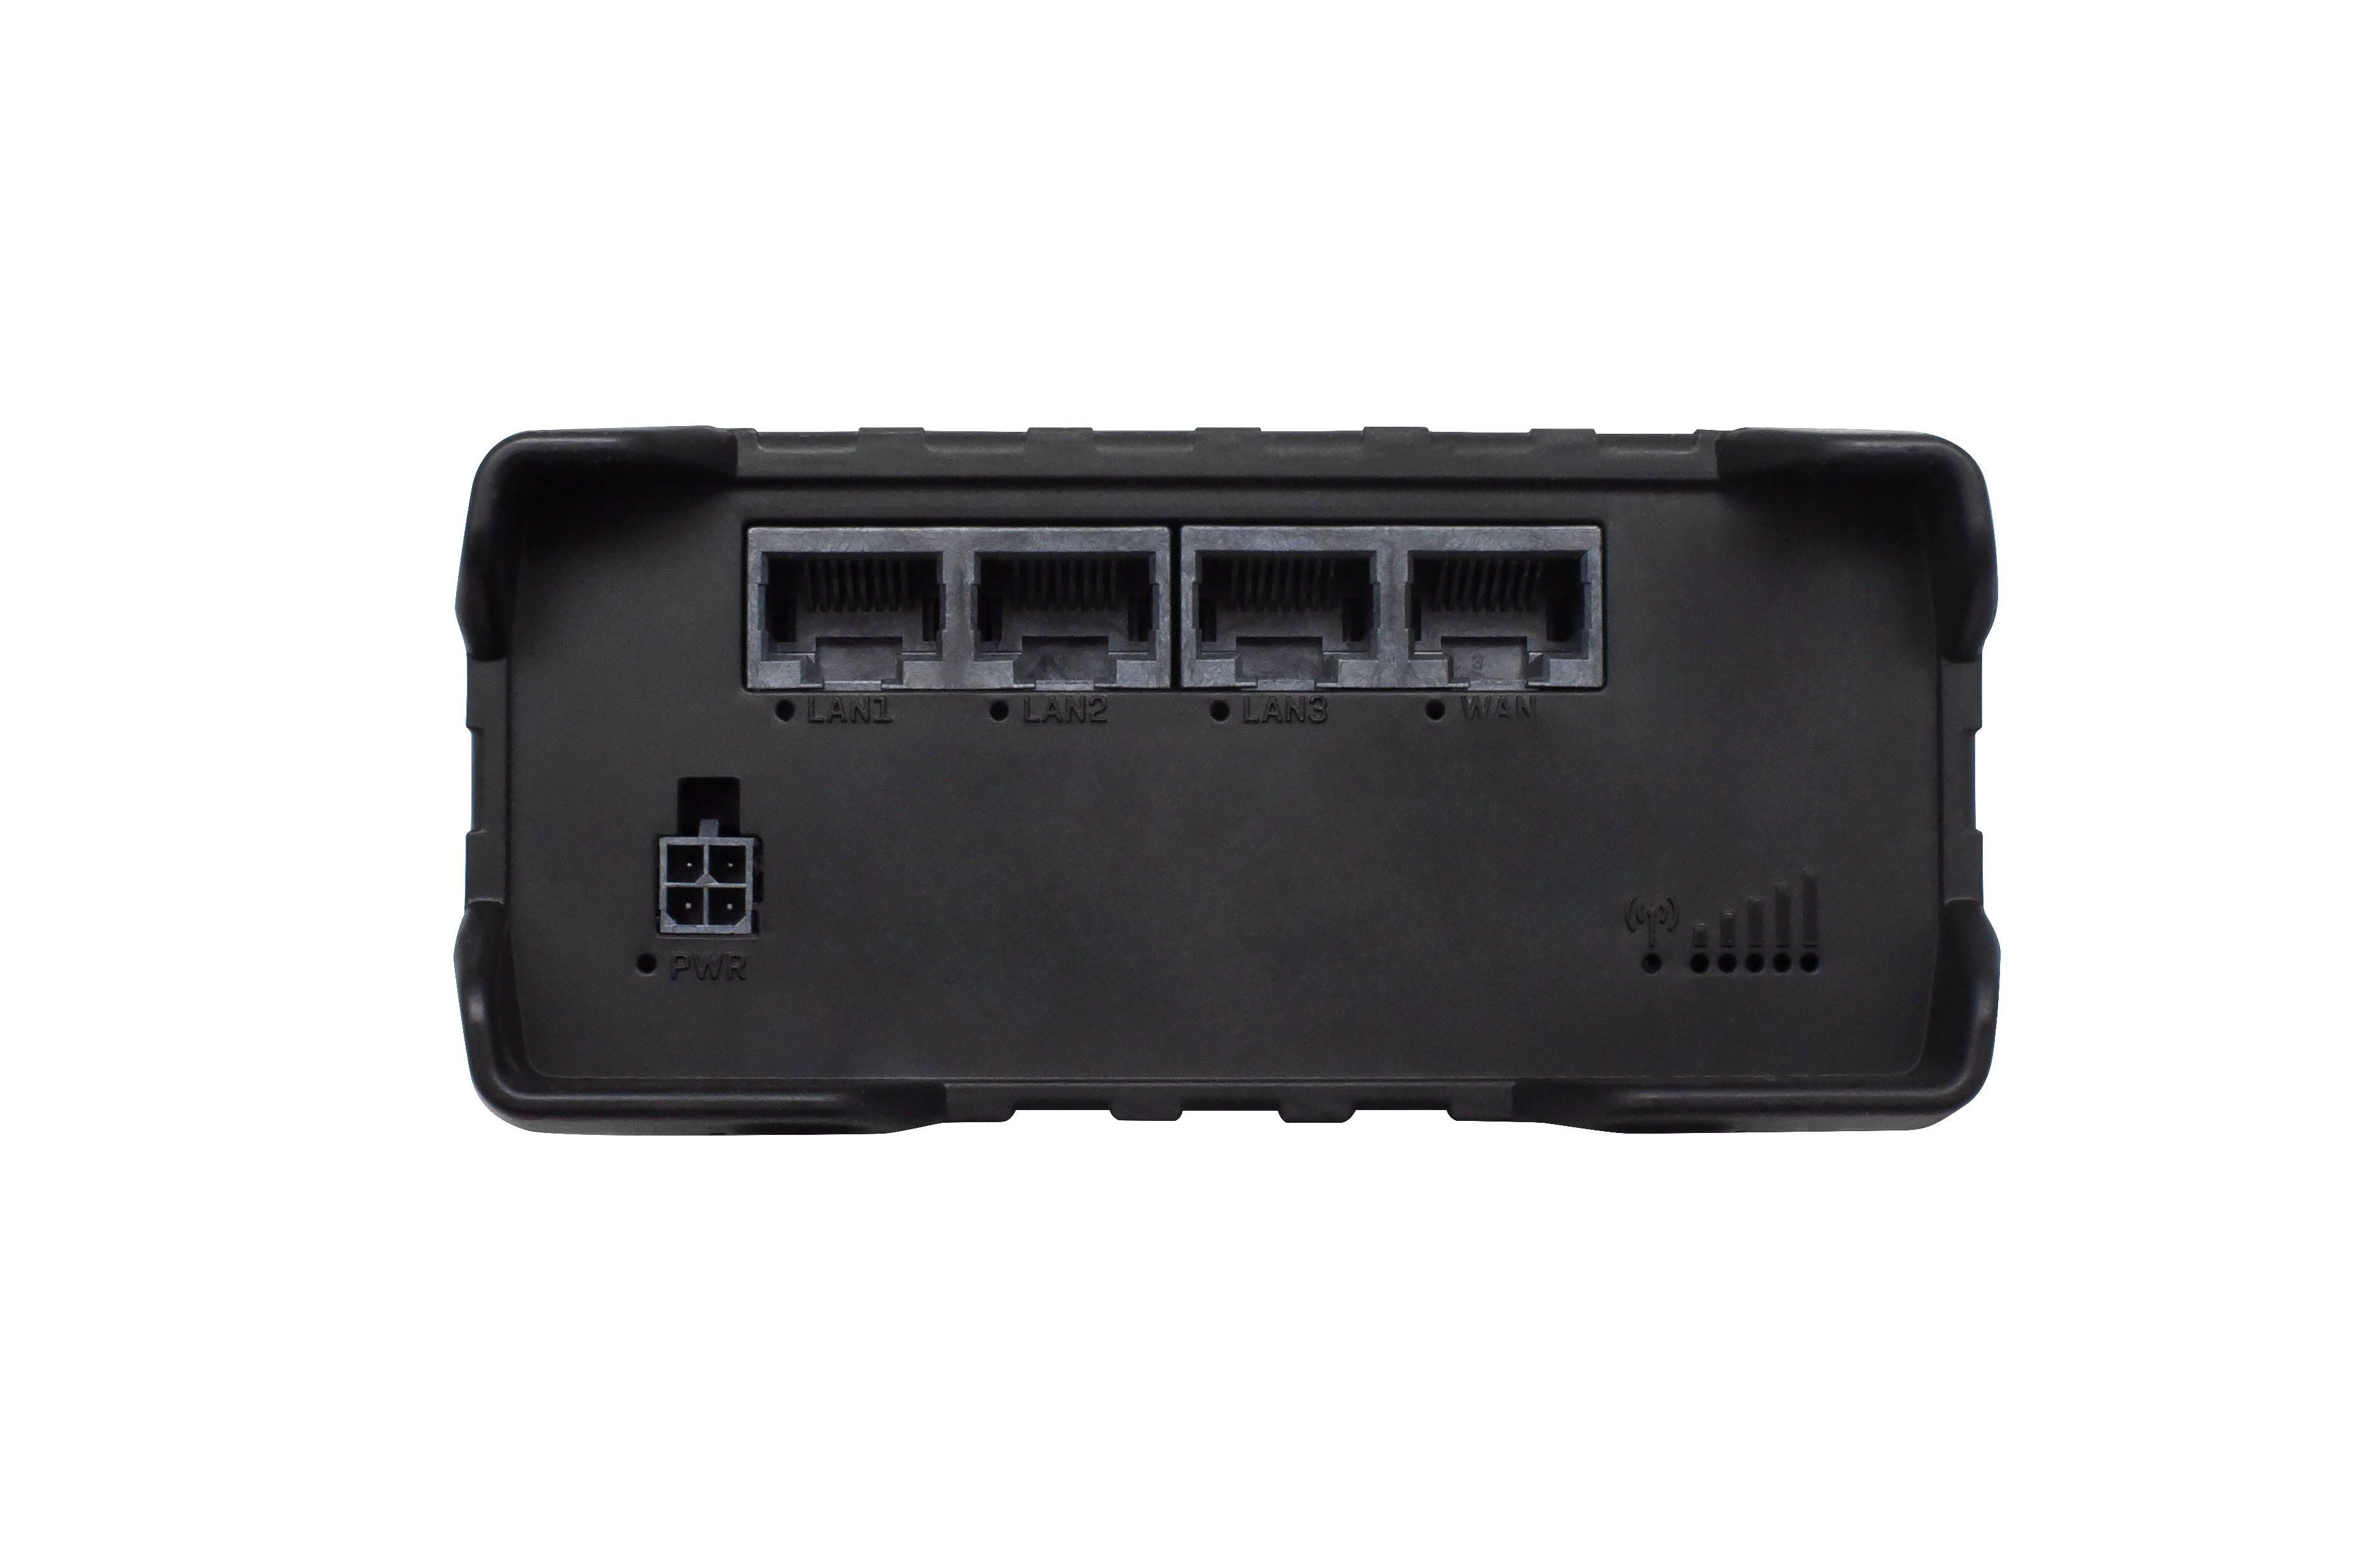 Teltonika RUT950J02400 model RUT950 LTE 4G Router for AT&T and T-Mobile;  Automatic Switch to Available Backup Connection; Wireless Access Point with